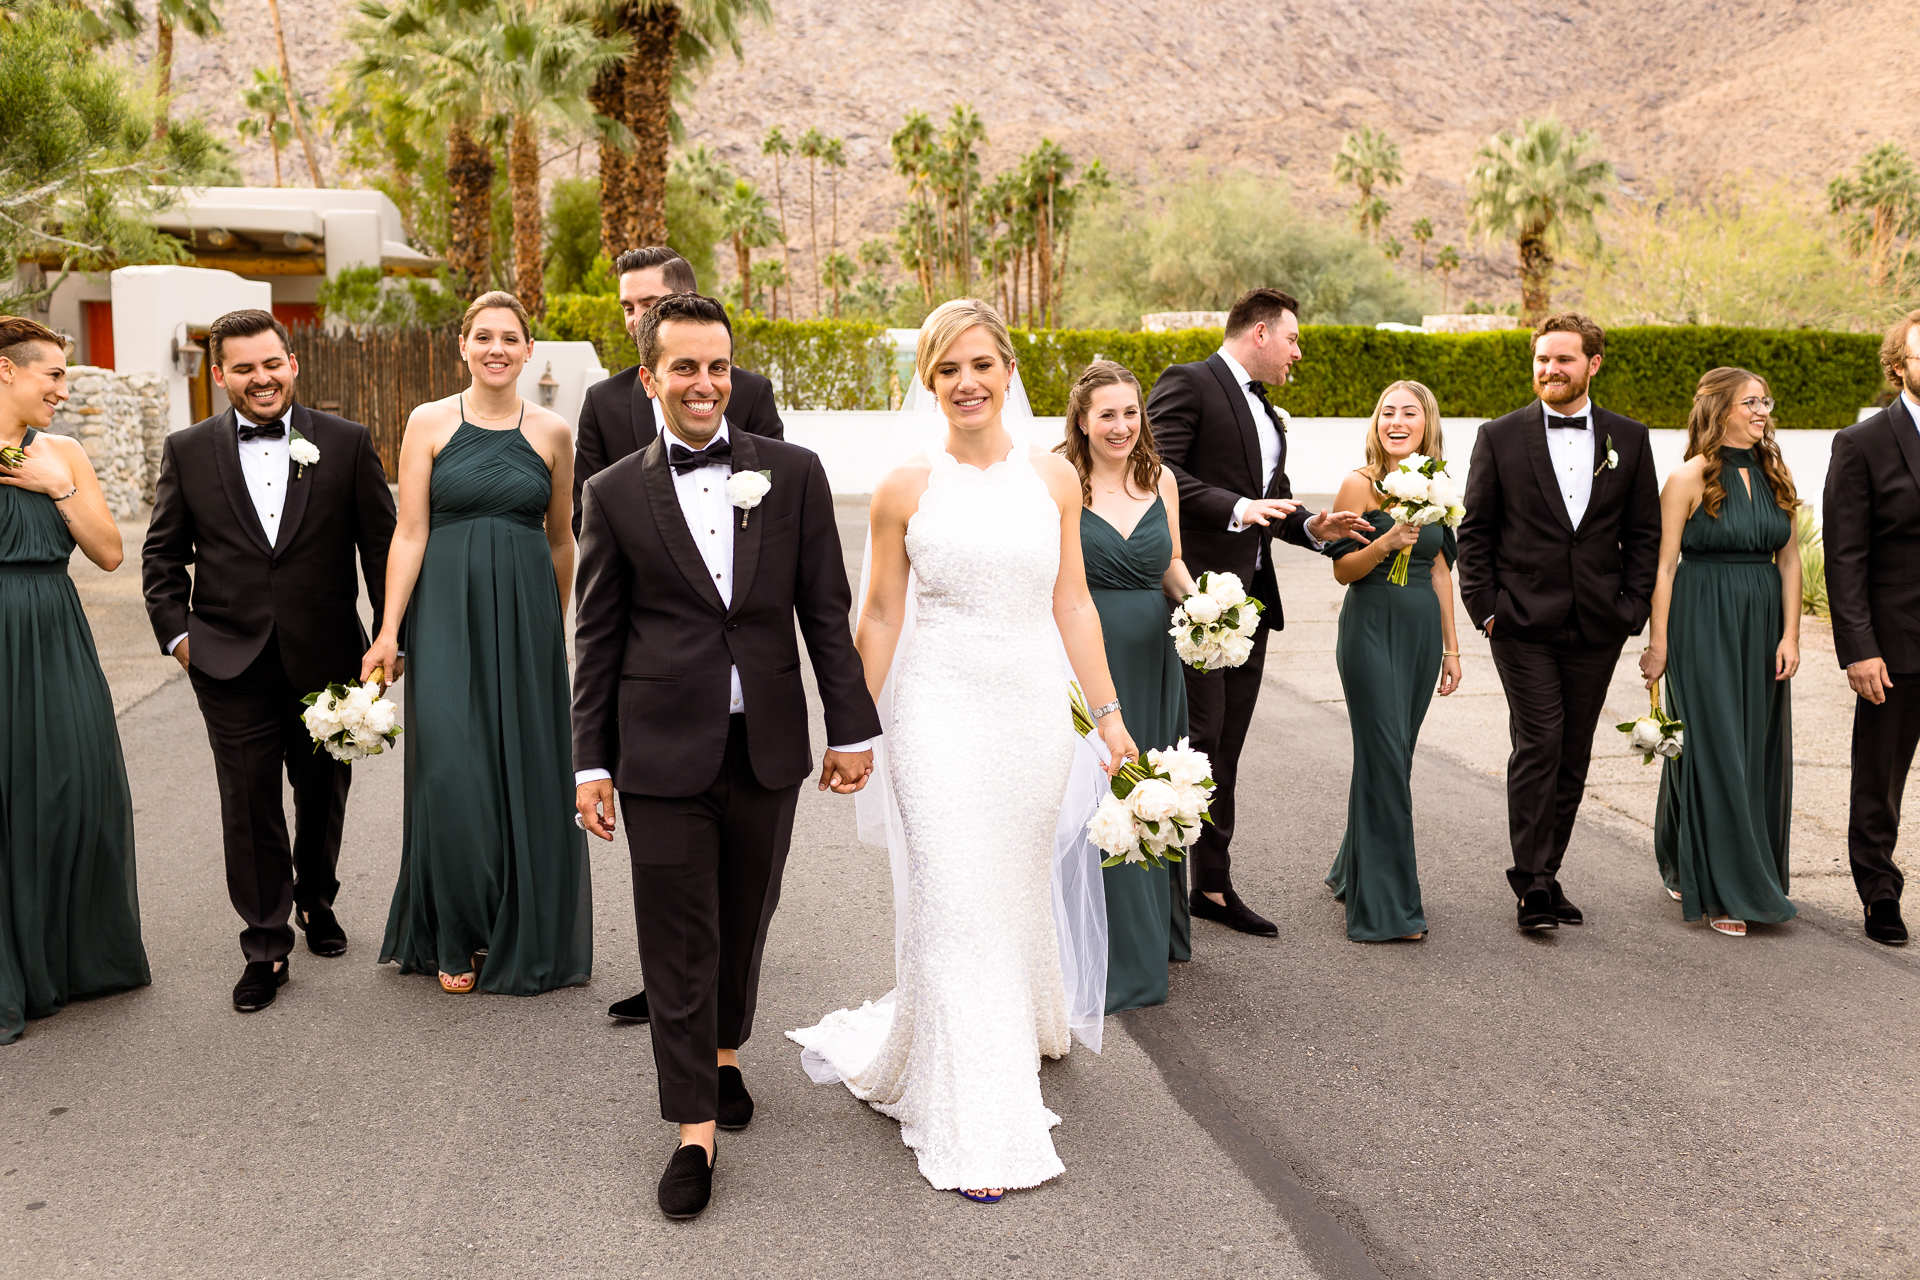 Bridal party portraits in Palm Springs, California - emerald bridesmaids dress inspiration